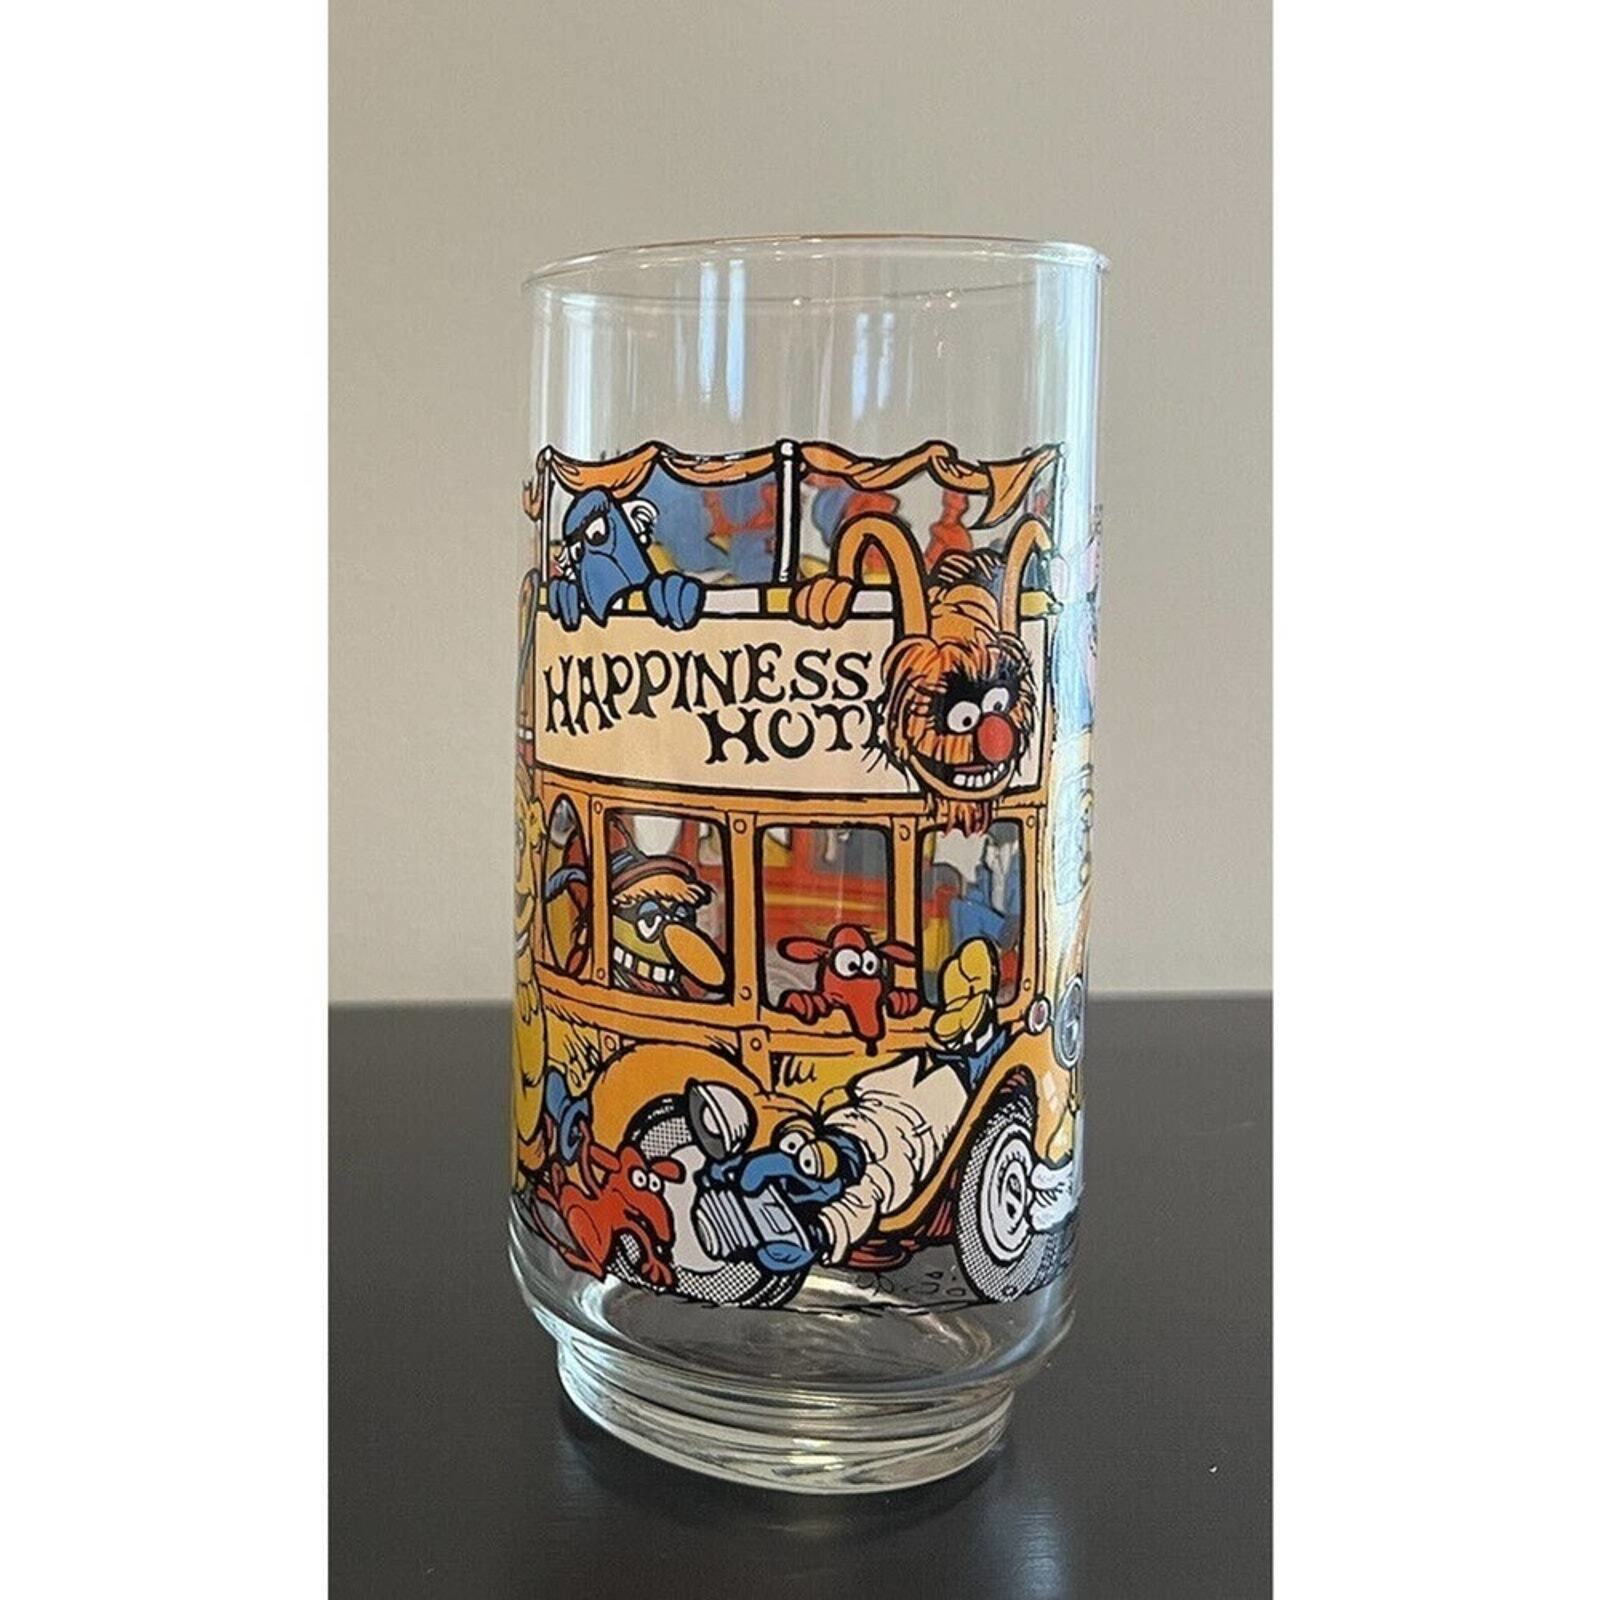 The Great Muppet Caper Happiness Hotel Drinking Glass McDonalds 1981 Vintage